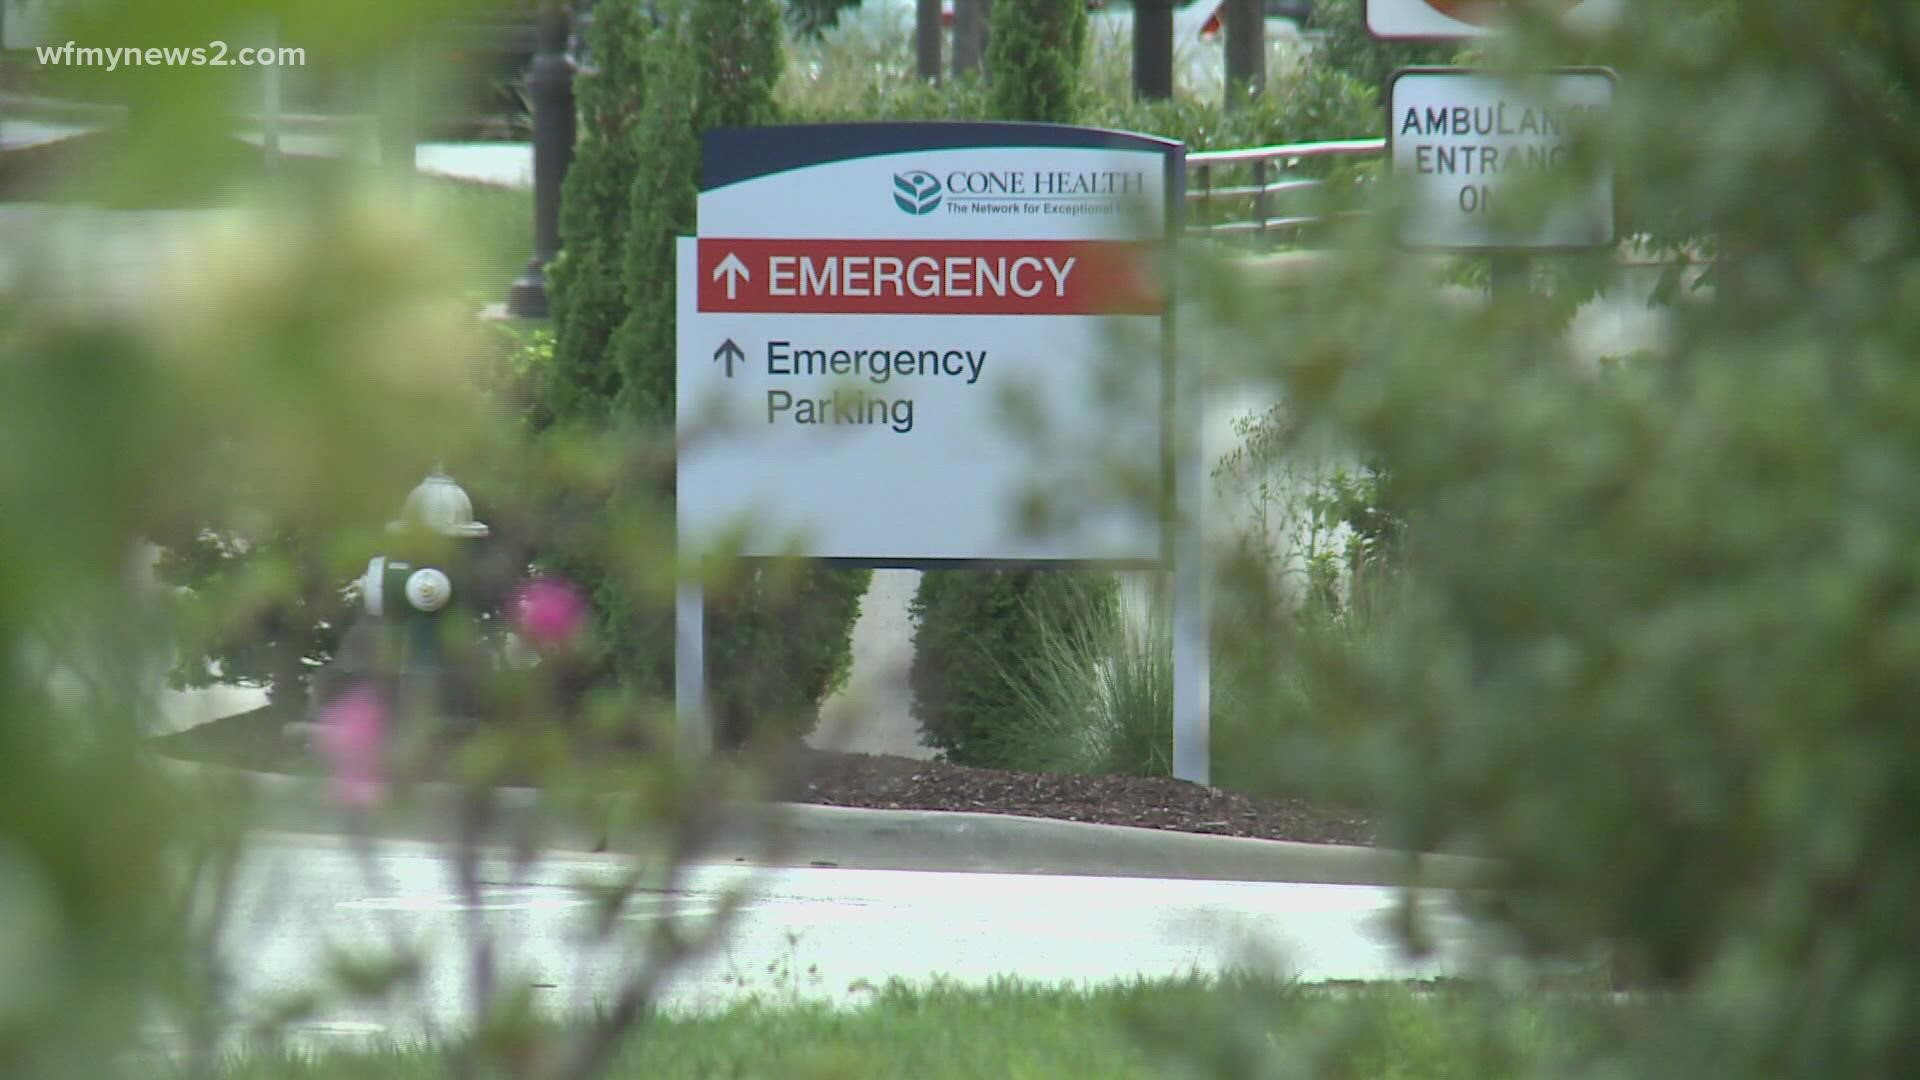 Cone Health says longer wait times are because of a surge in COVID-19-positive patients and a staffing shortage.